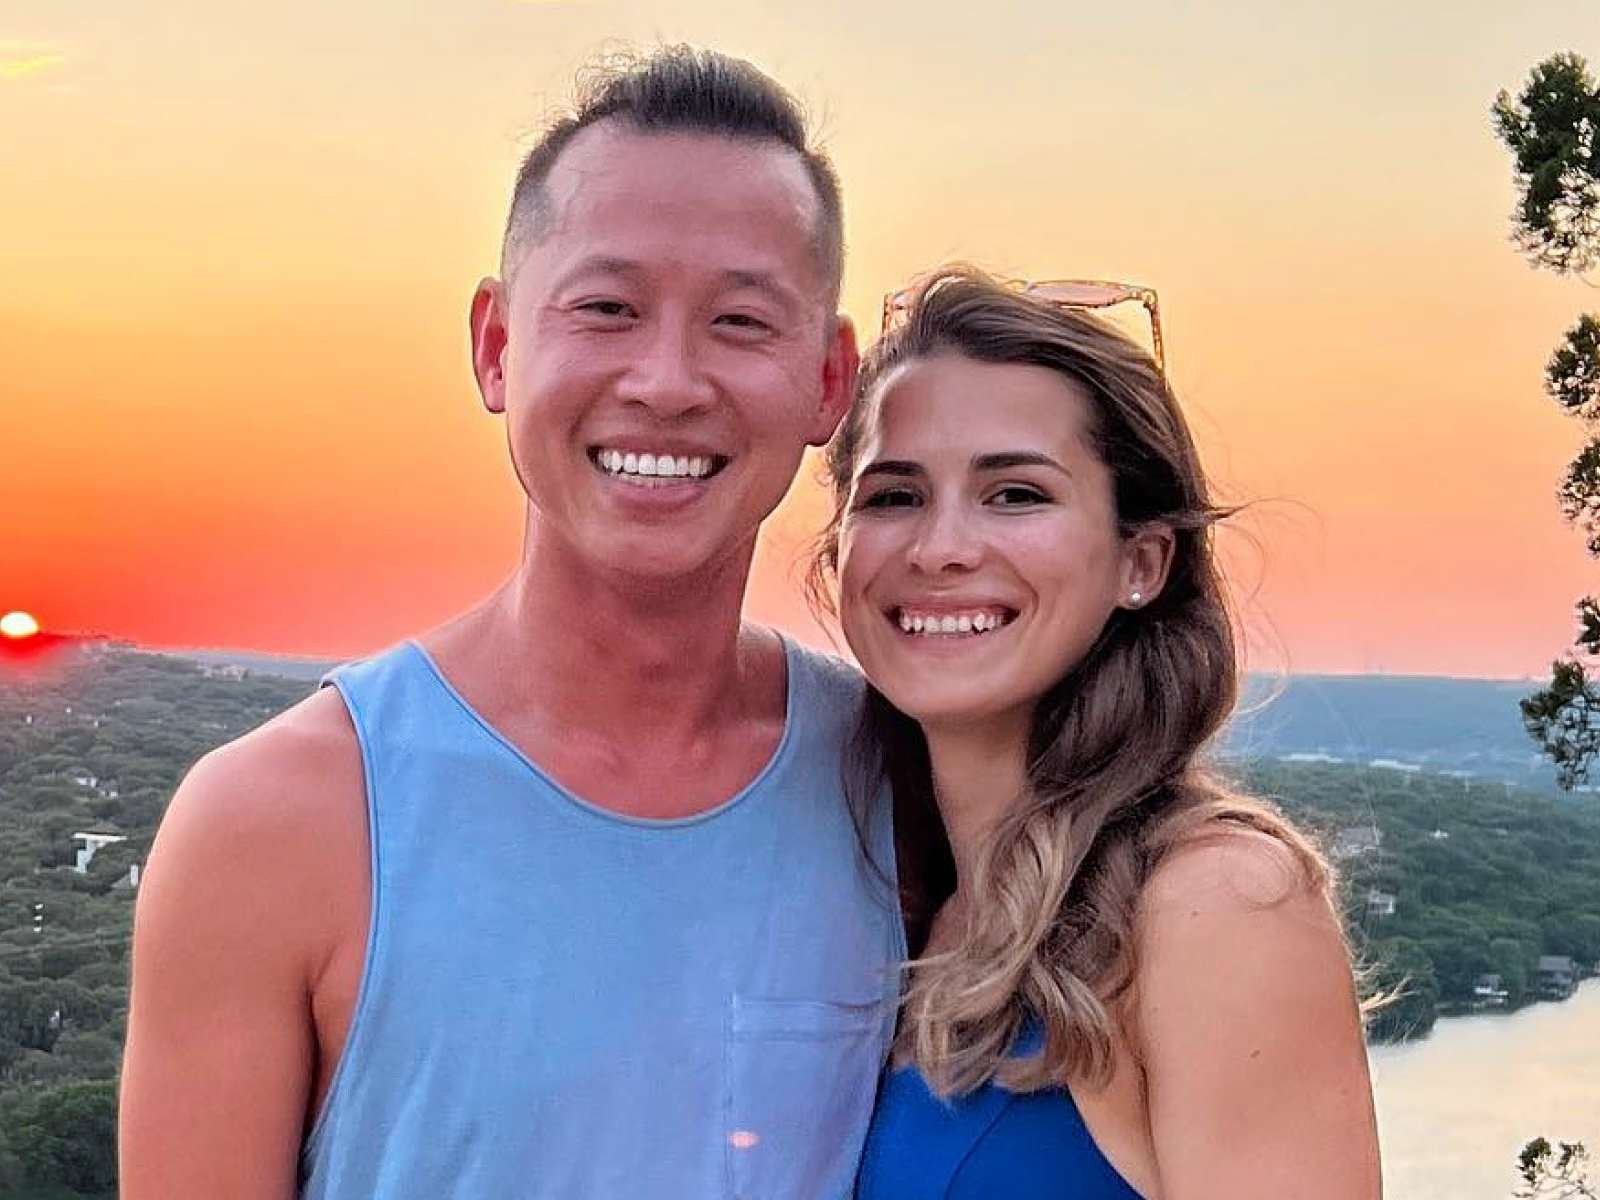 Married at First Sight alum Johnny Lam has gone Instagram official with new girlfriend photo